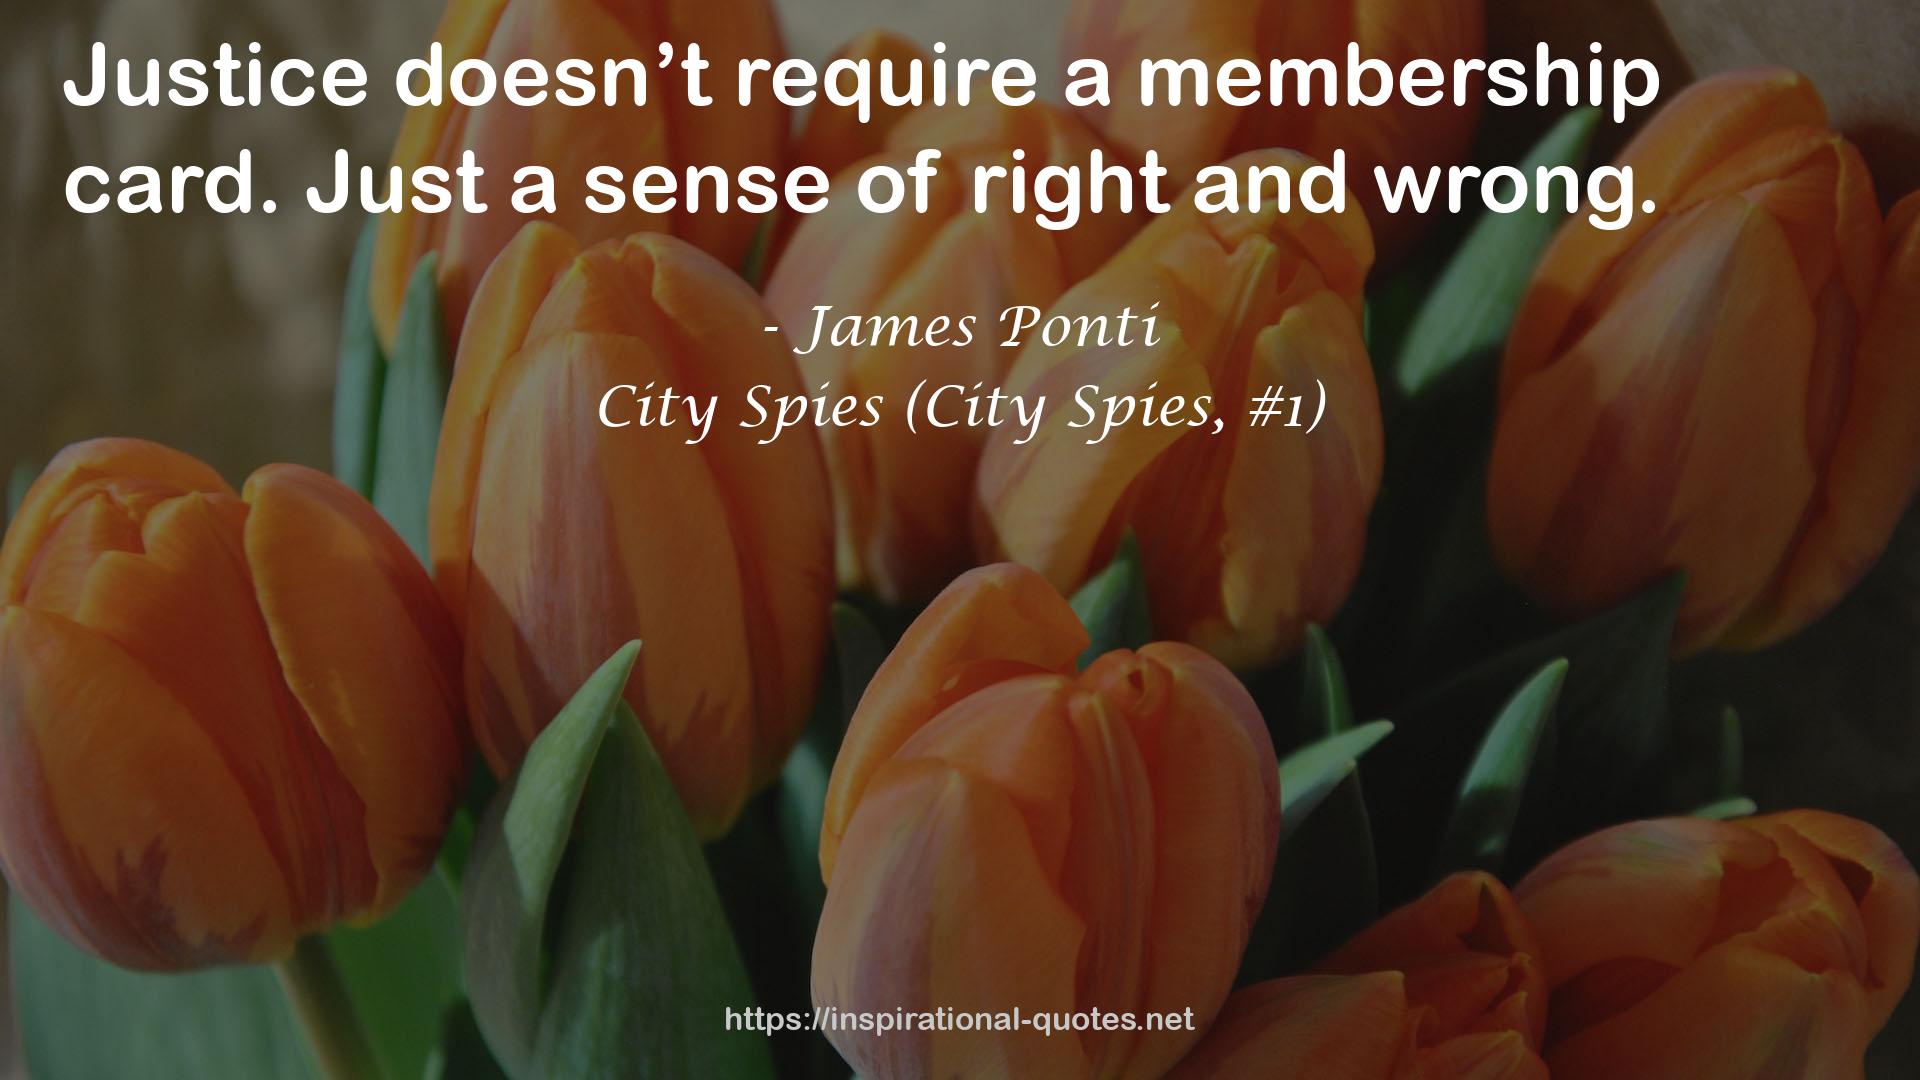 City Spies (City Spies, #1) QUOTES